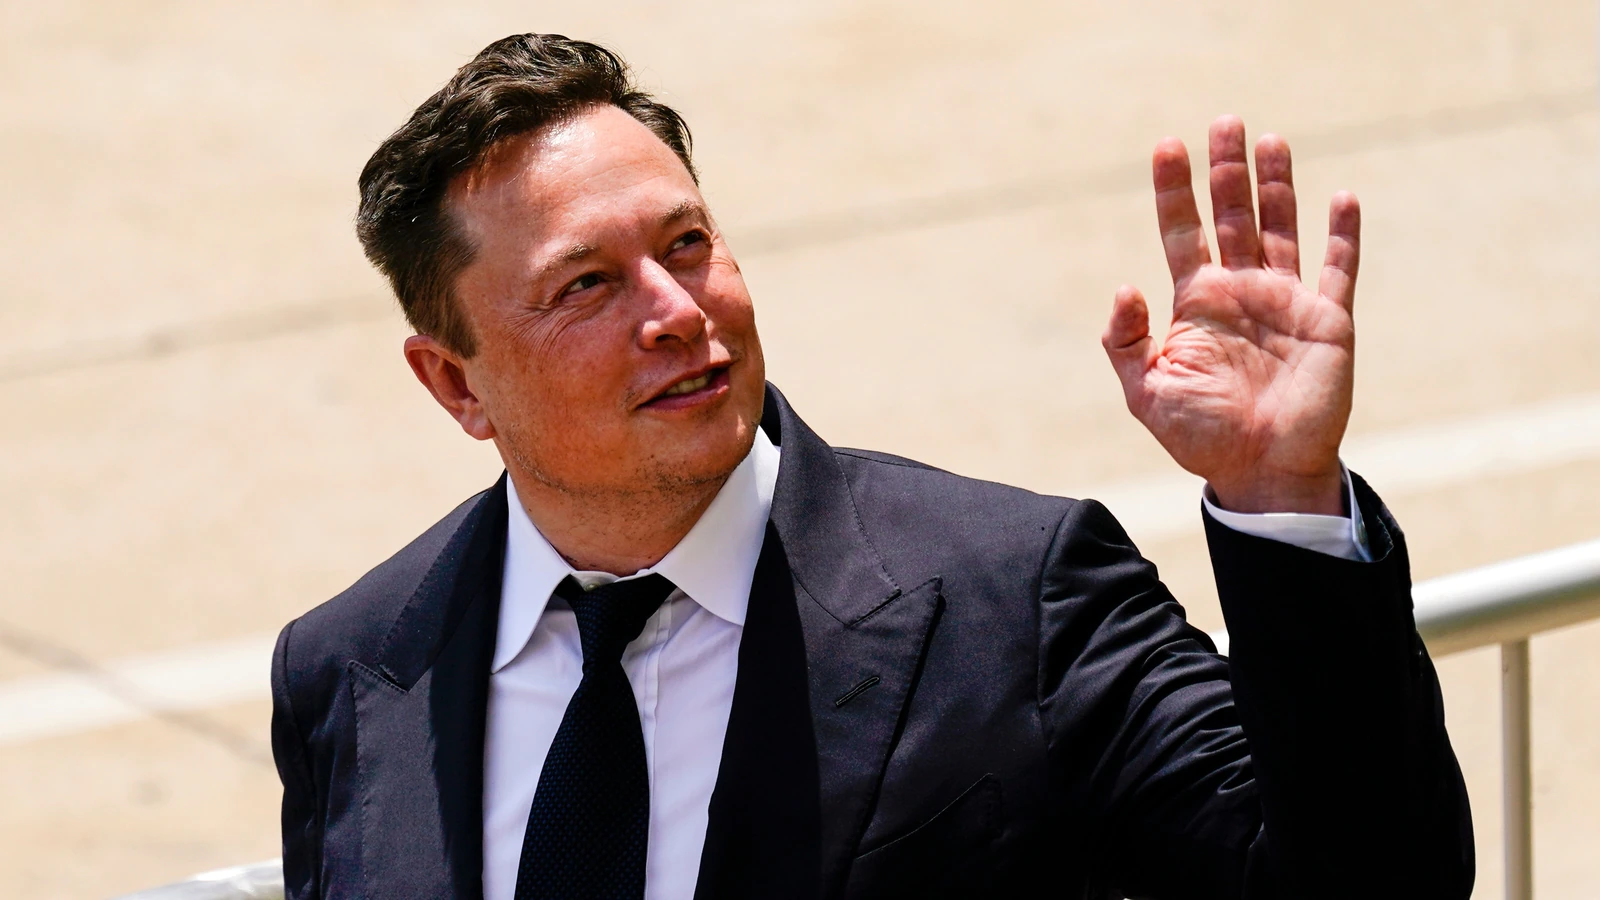 Elon Musk ‘Lols’ at the ‘irony’ as Twitter takes him to court for $44 bn deal